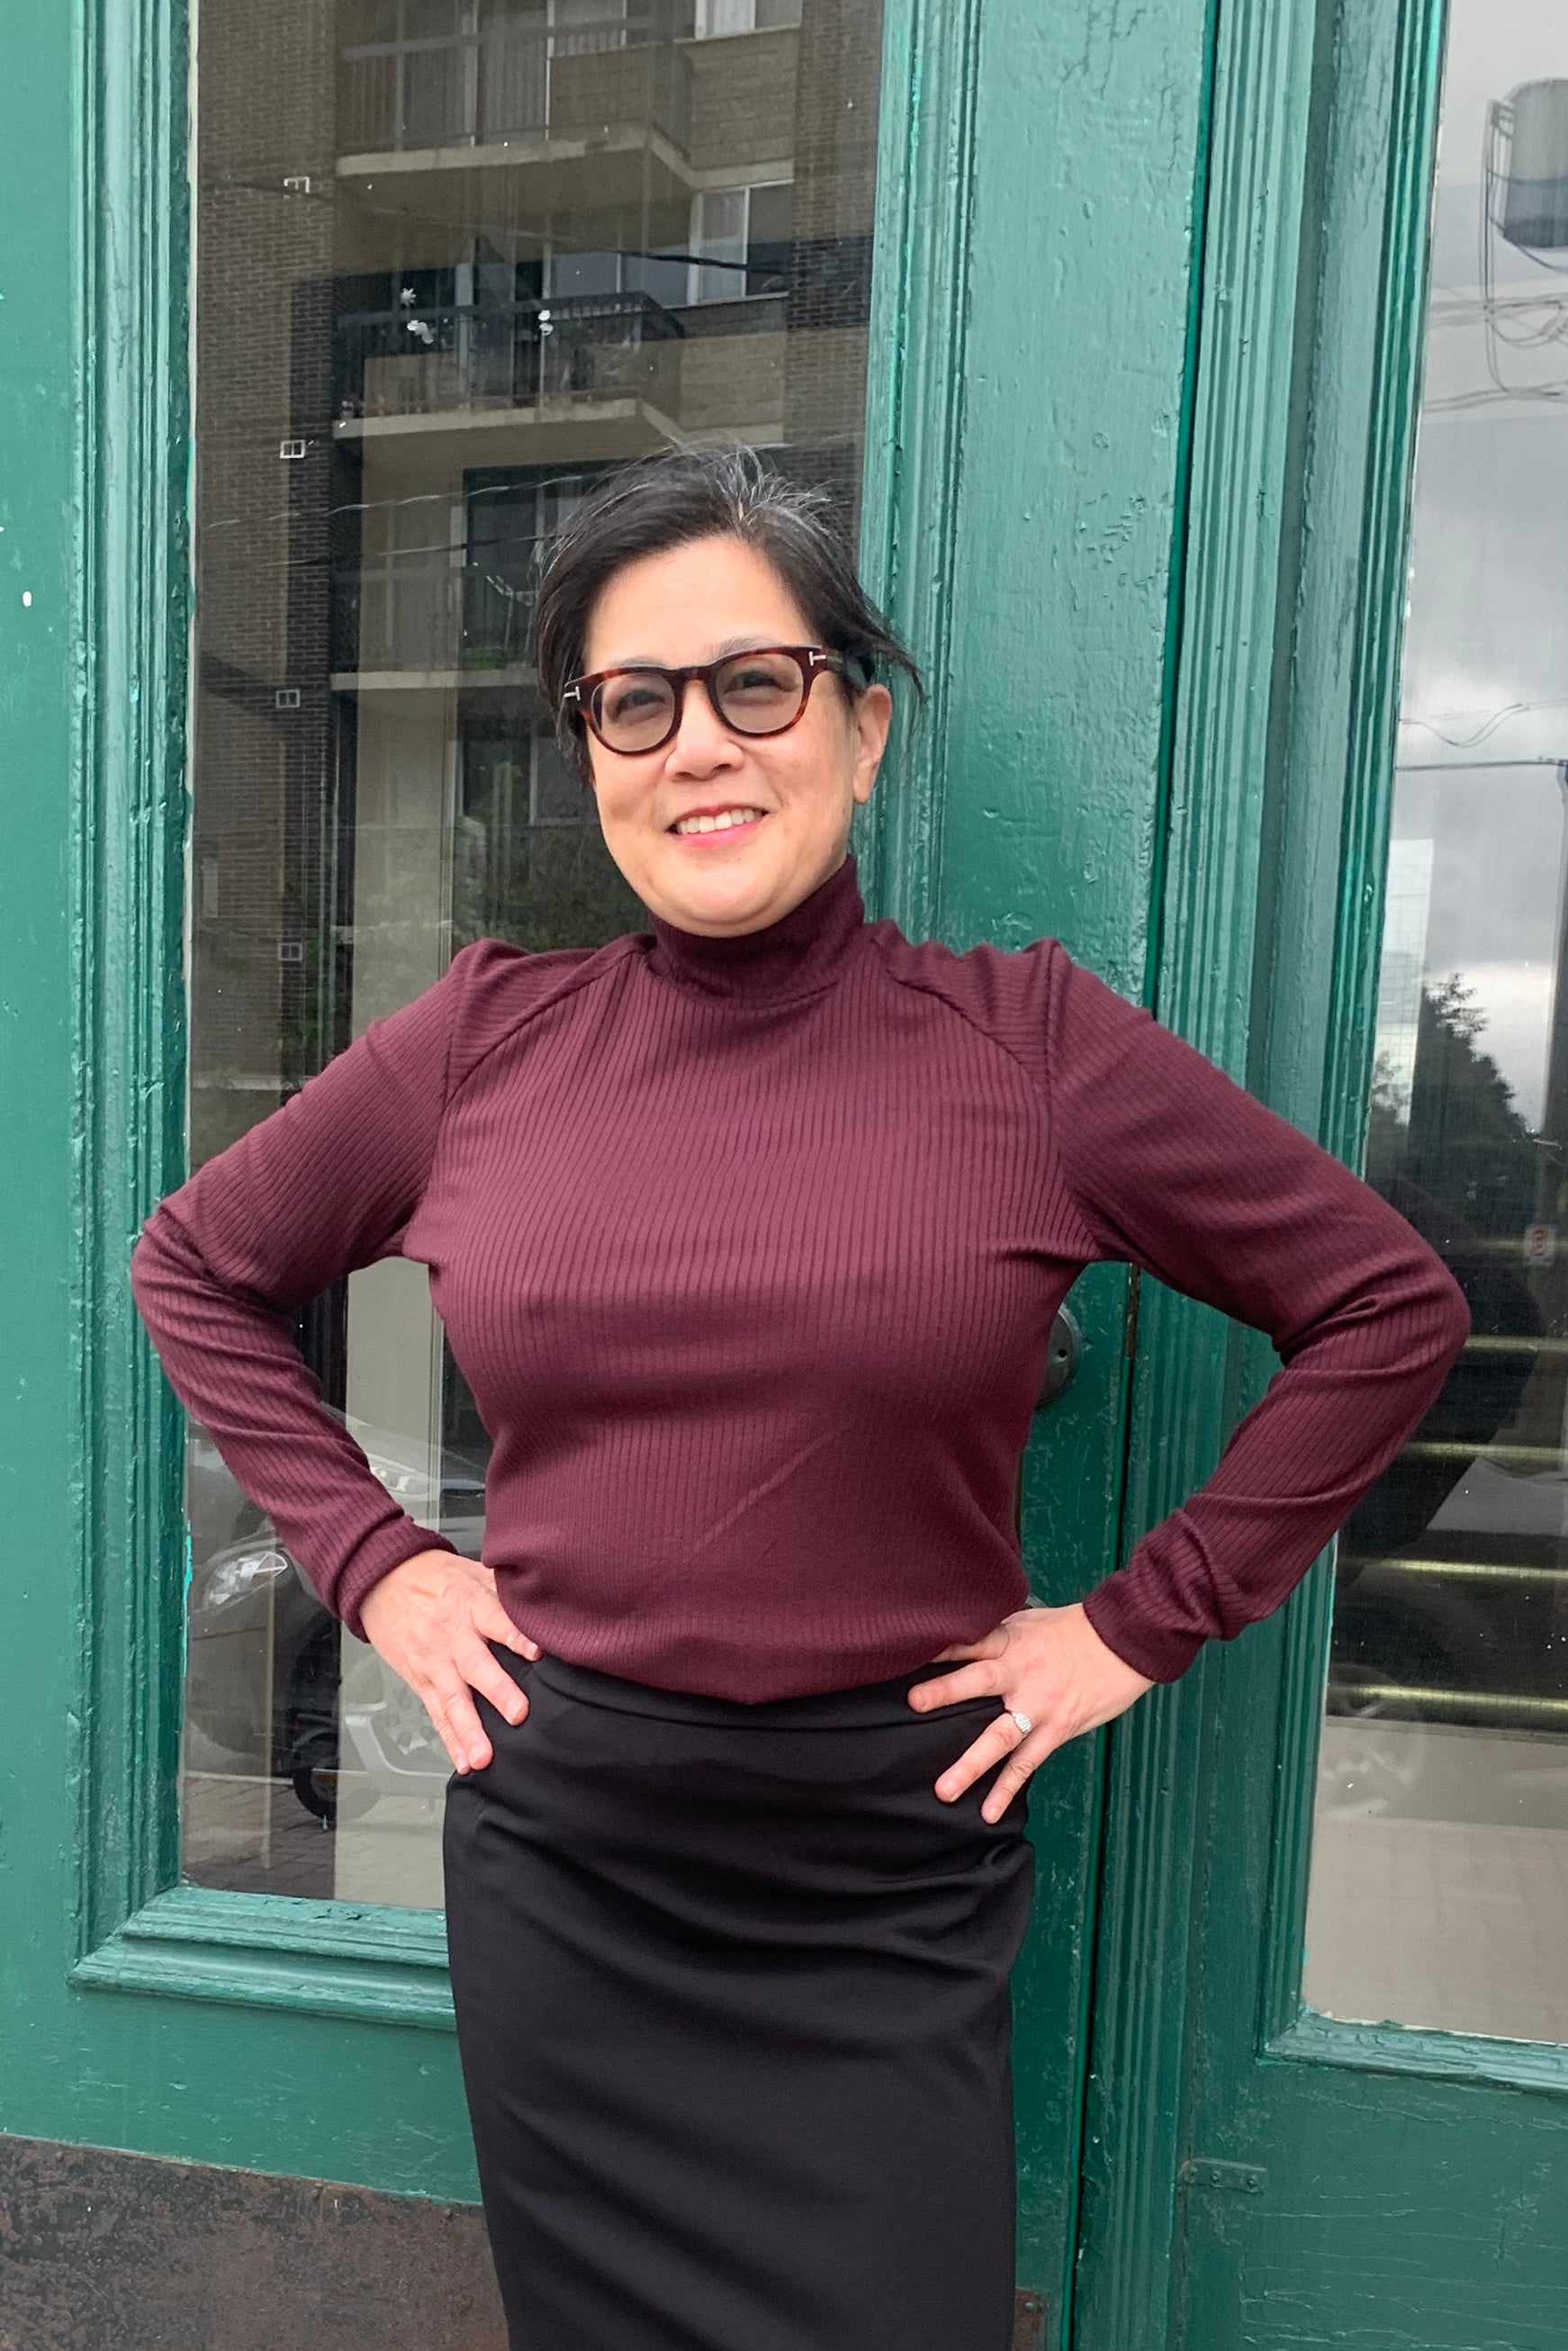 Claudia Top by Luc Fontaine, Plum, mock turtleneck, rib knit, sizes 4-16, made in Canada.